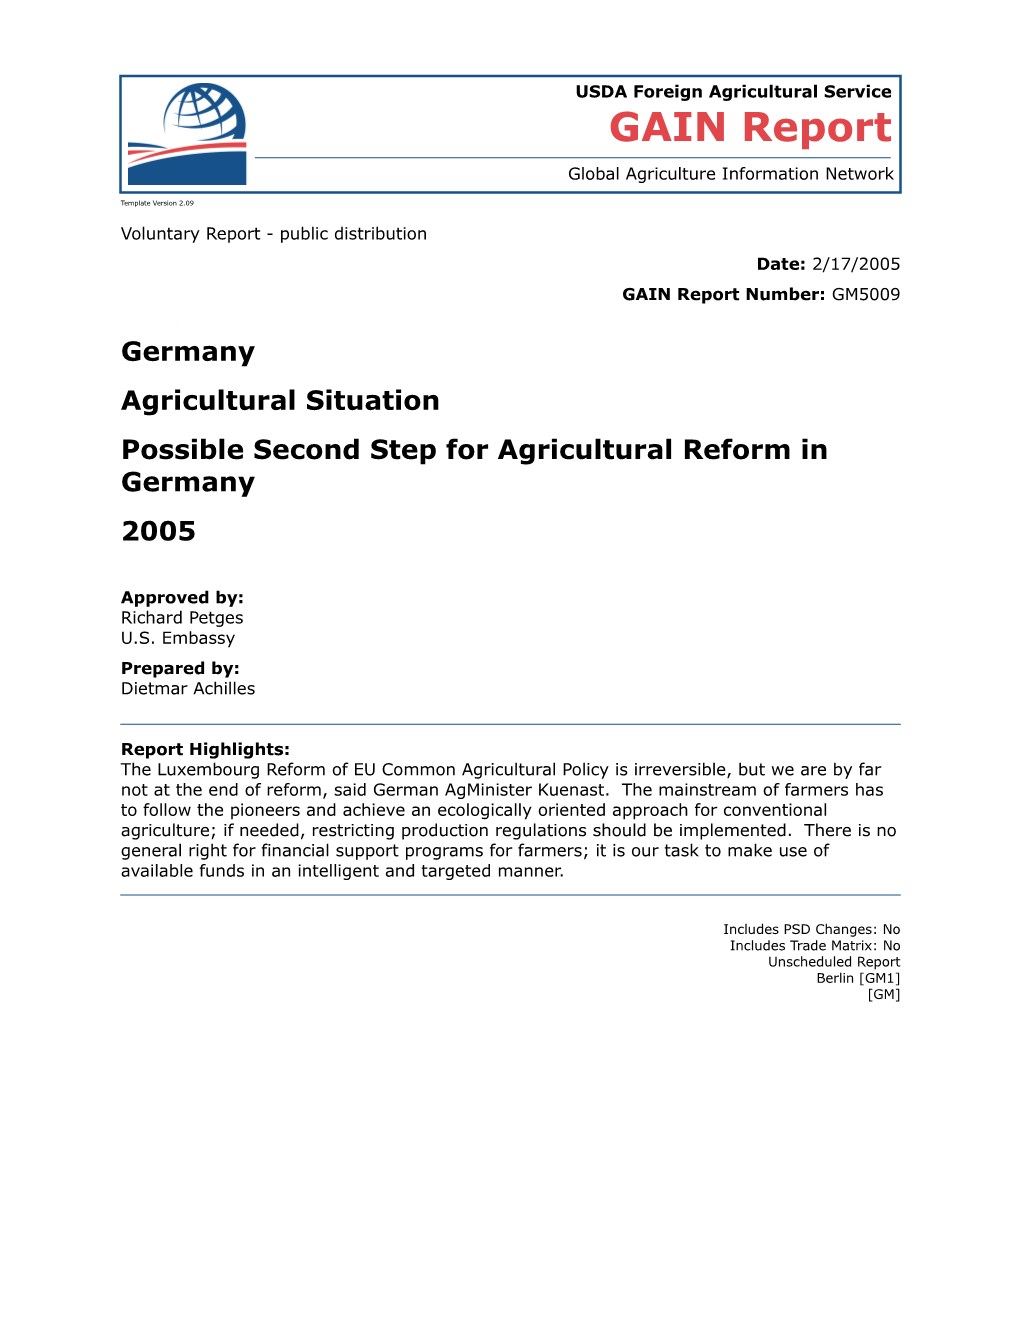 Possible Second Step for Agricultural Reform in Germany